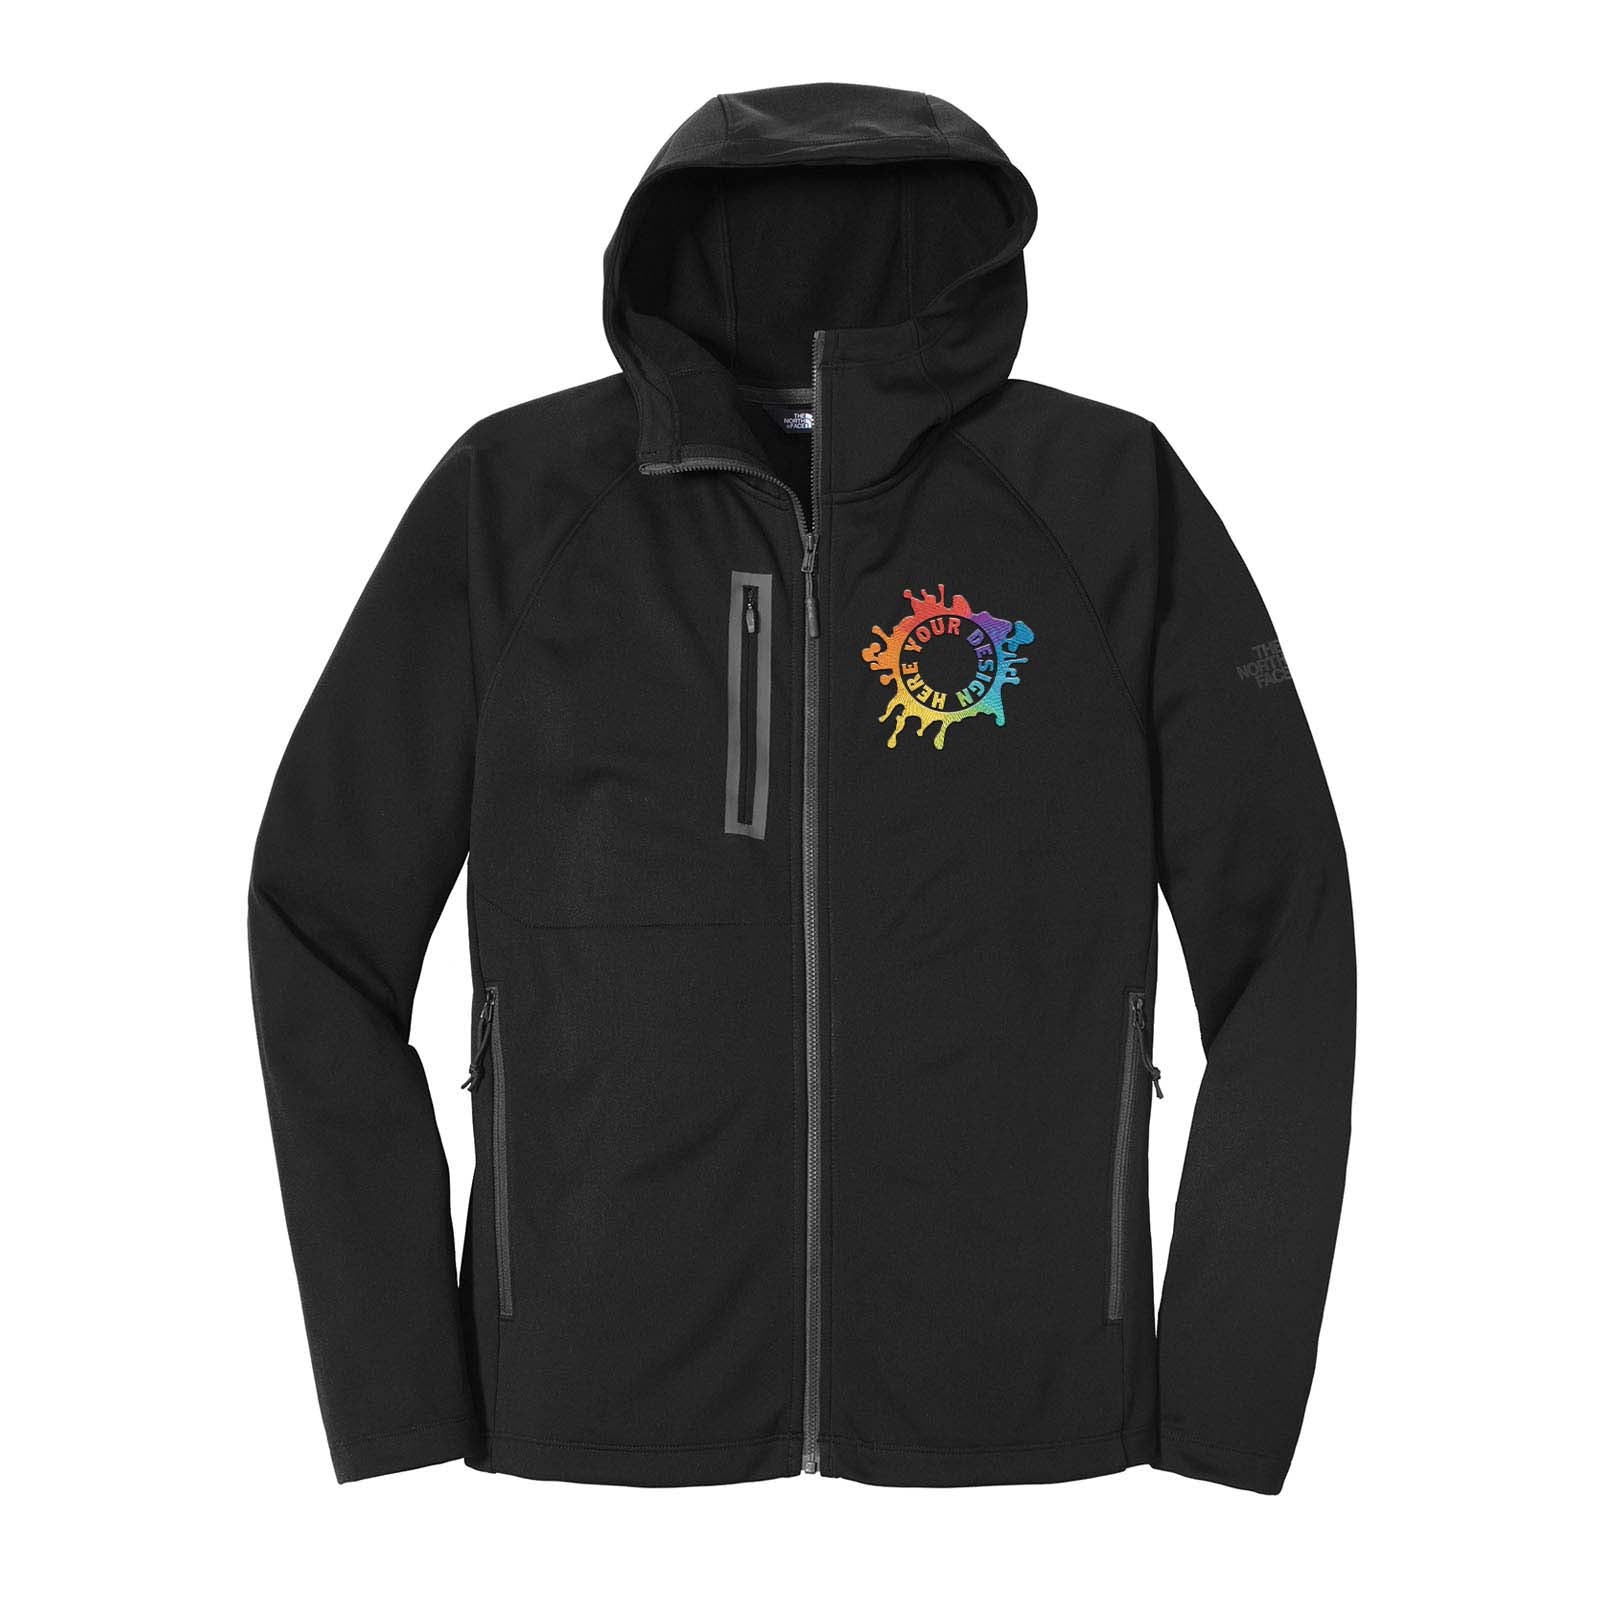 The North Face® Canyon Flats Fleece Hooded Jacket Embroidery - Mato & Hash